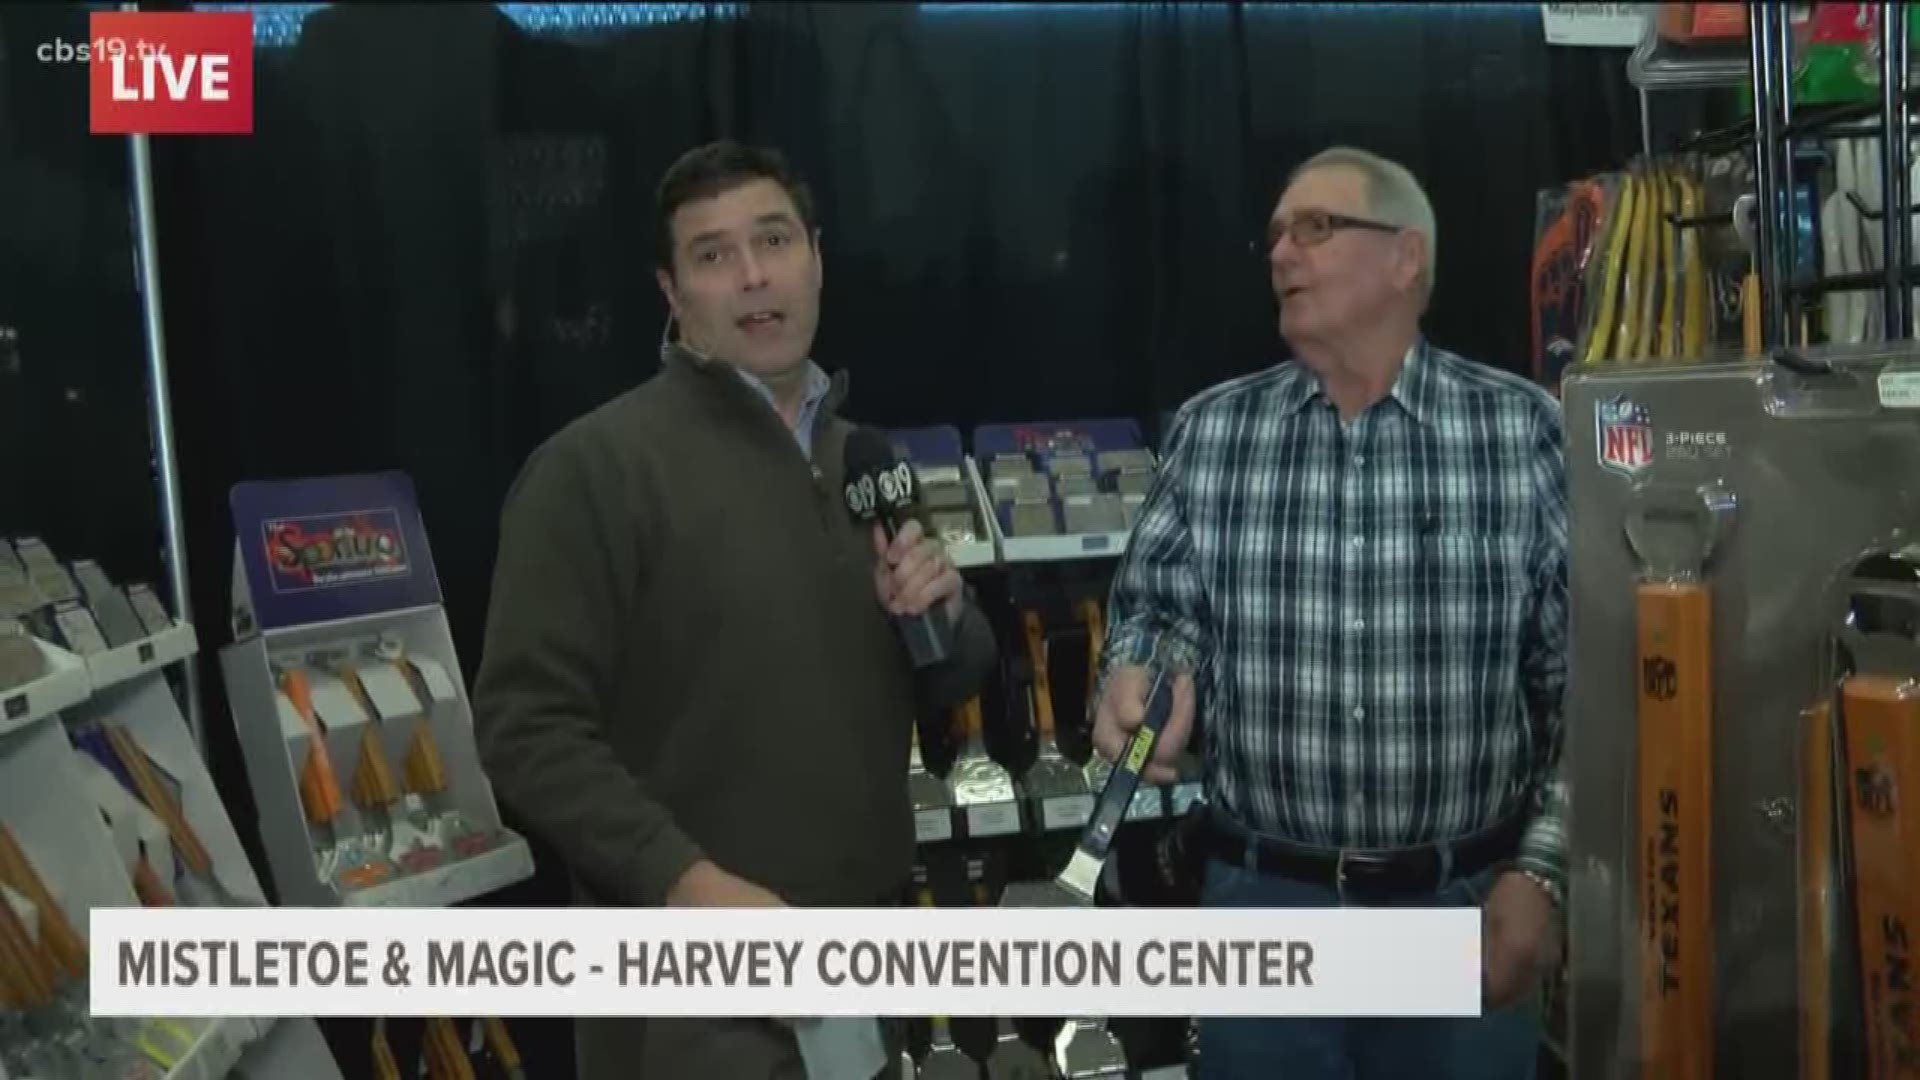 The Tyler Junior League's biggest fundraiser of the year brings out vendors from all over, offers food and drinks, and supplies live entertainment.  That's right up Bryan's alley when it comes to ad-libbing a live shot and getting a quick sample of habane